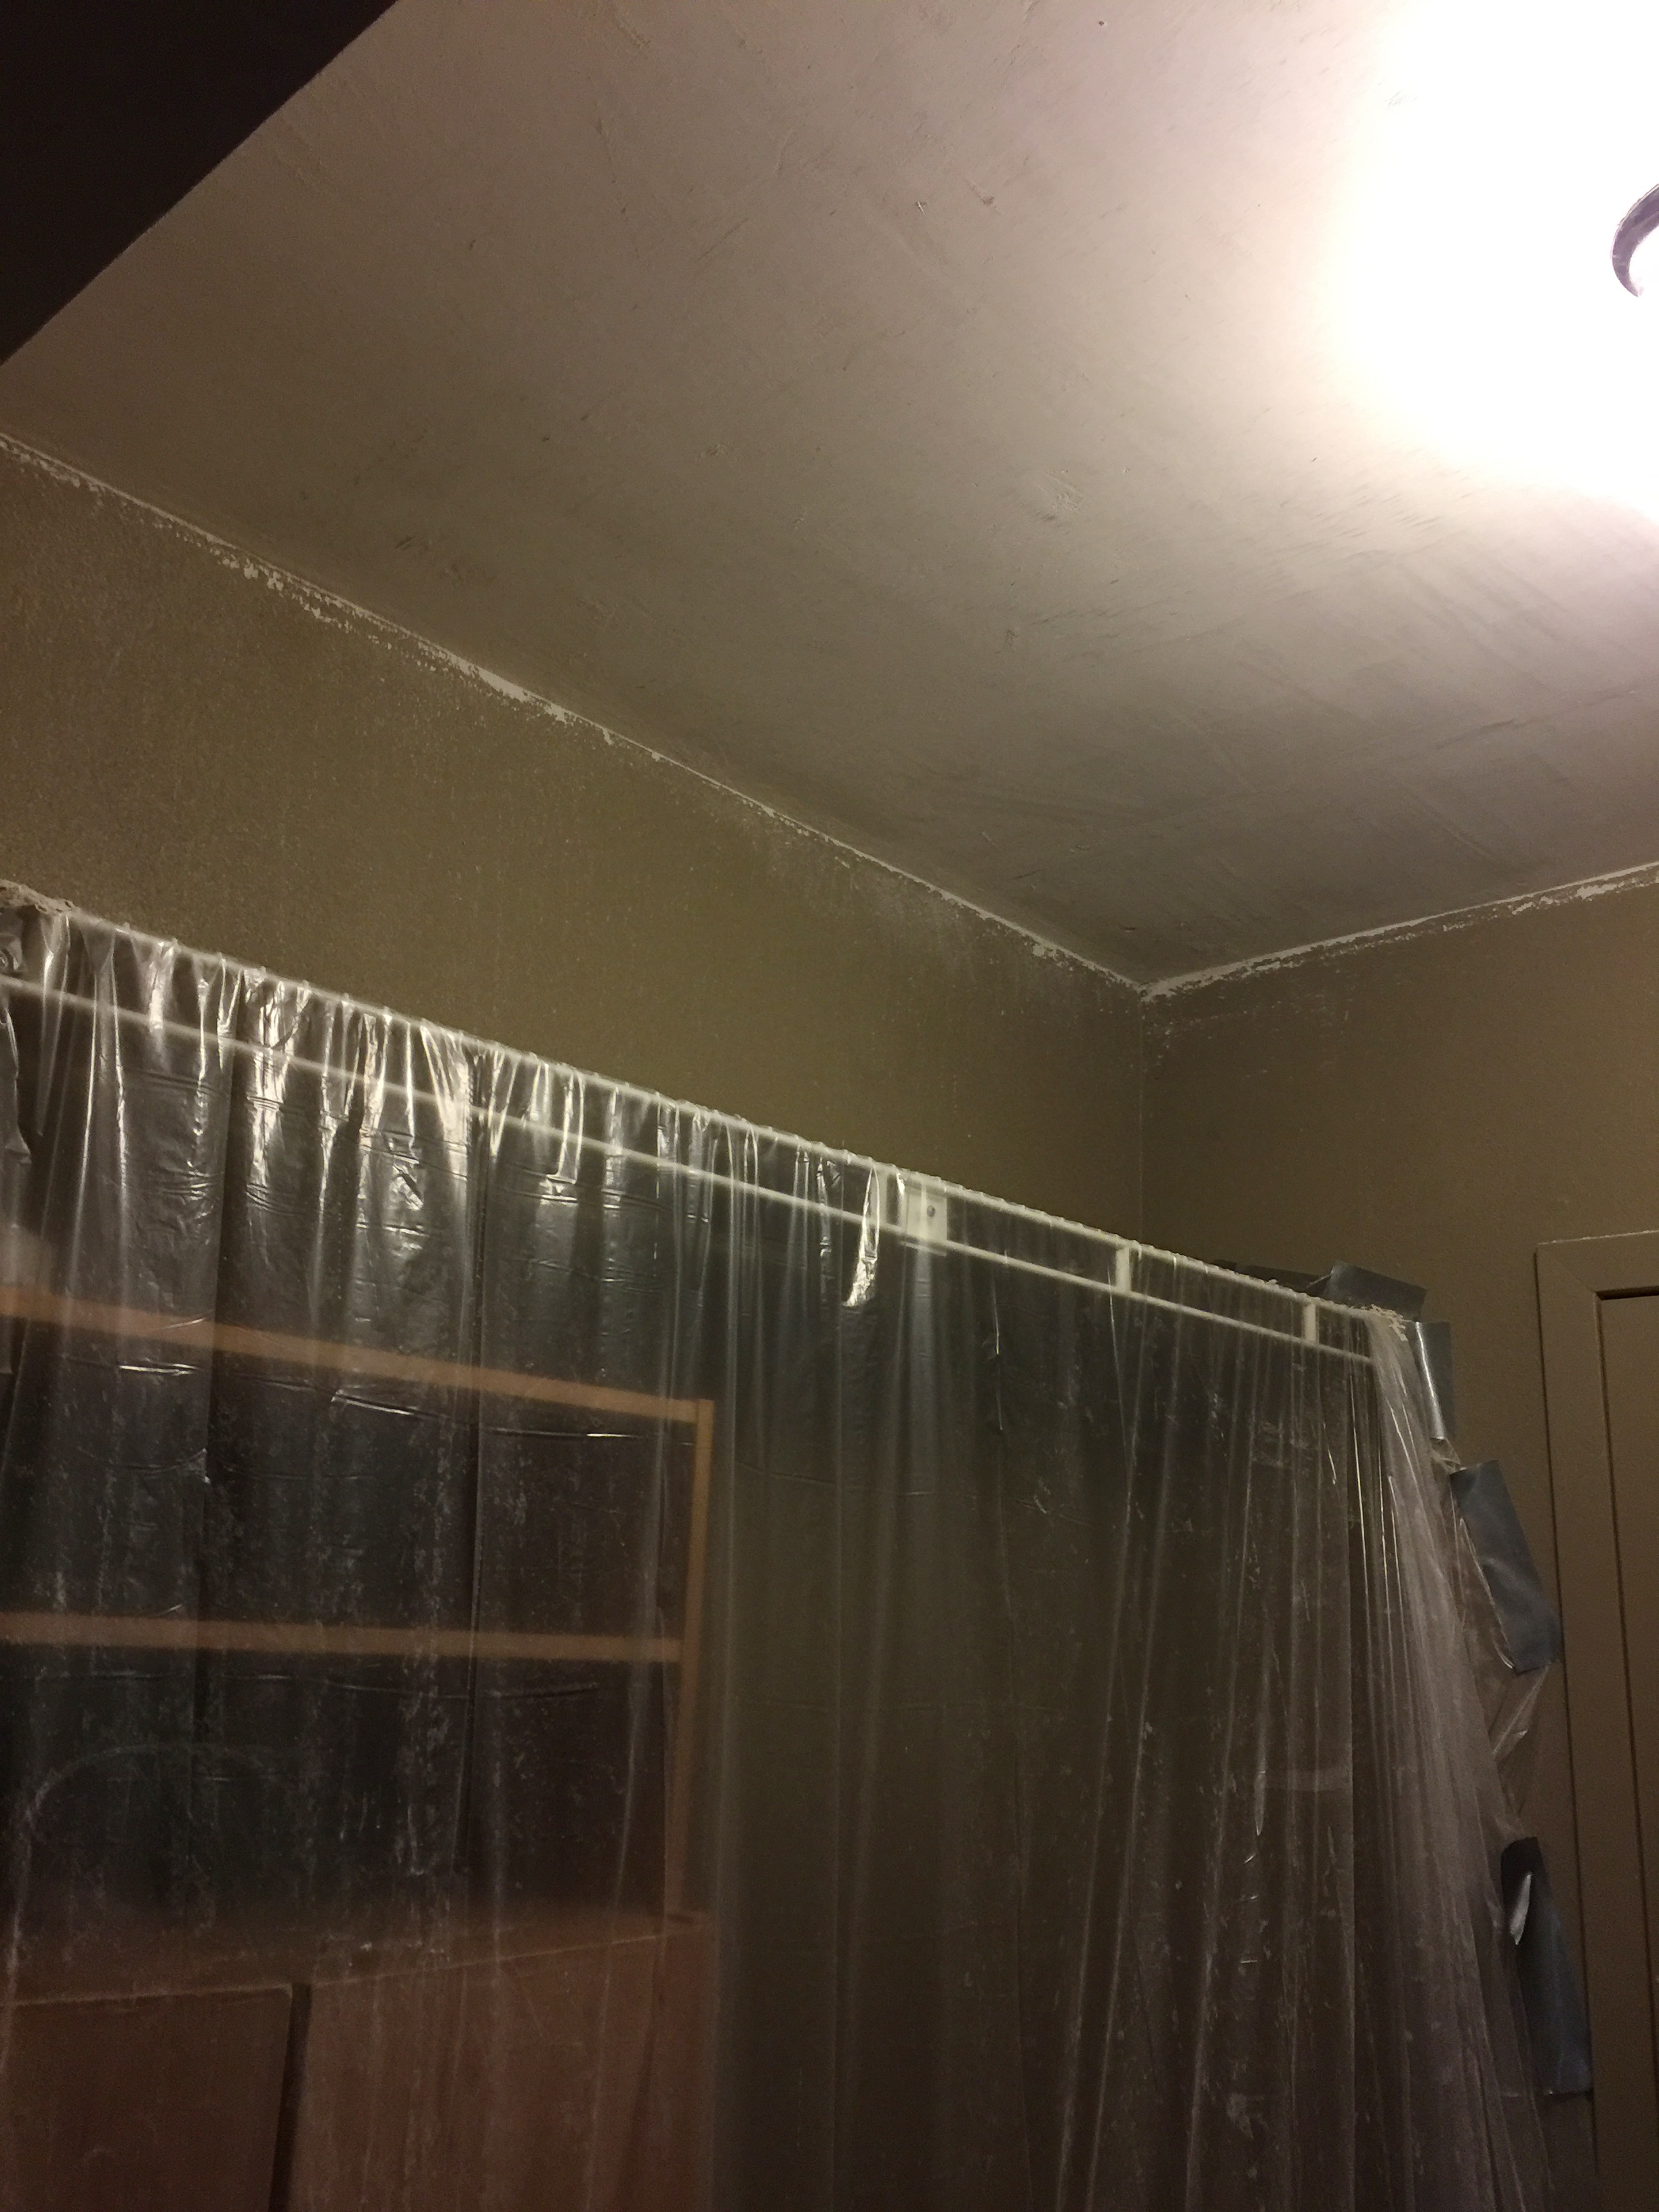 Home Reno Project Update How To Scrape Popcorn Off Ceilings